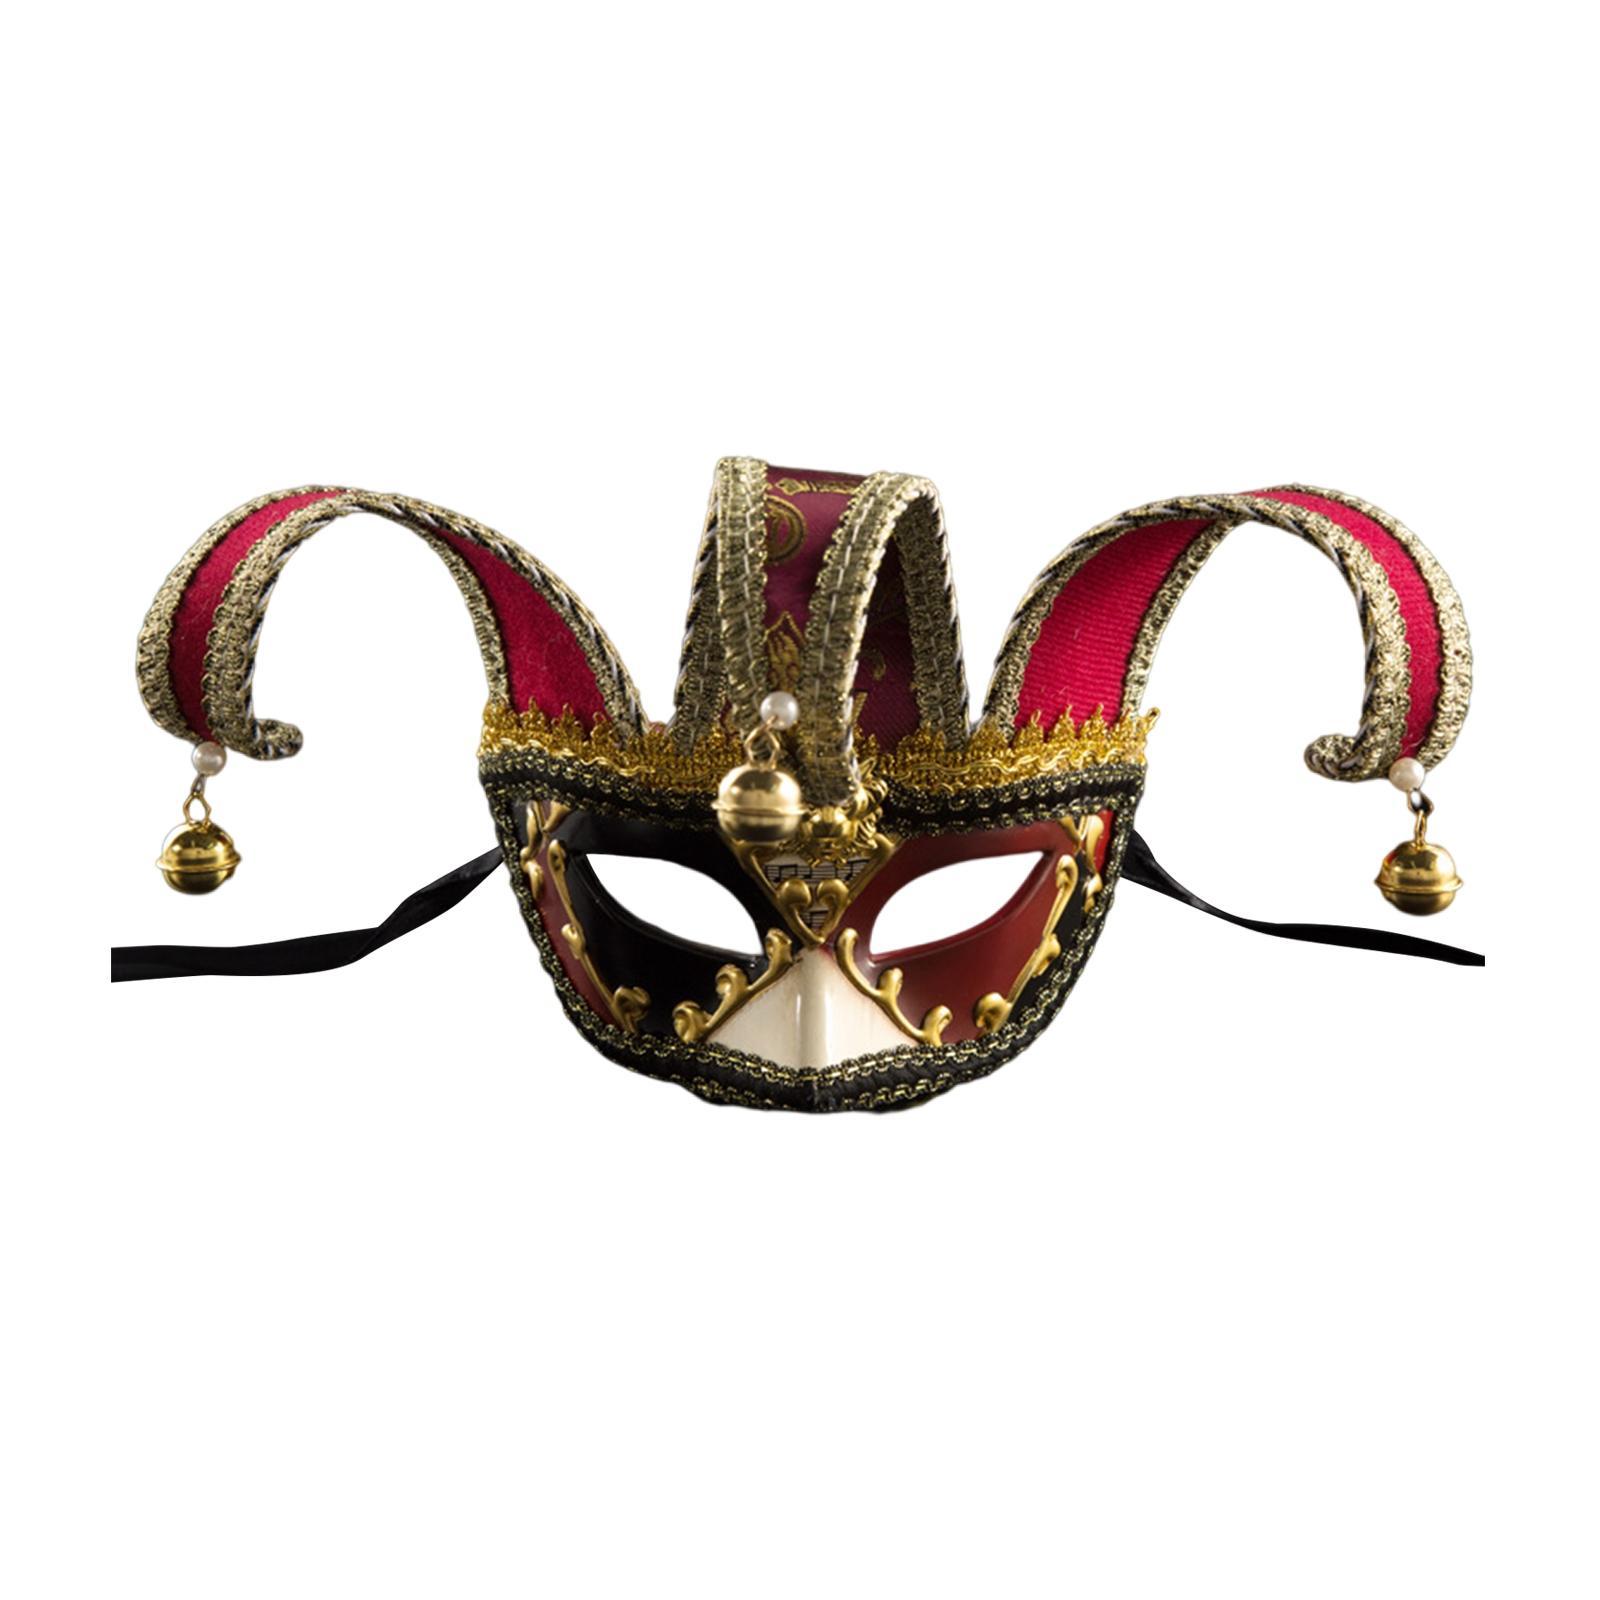 Half Face Mask Costume Cosplay Masquerade Mask Mask for Mardi Gras, Halloween, Party, Festival, Carnival Accessory